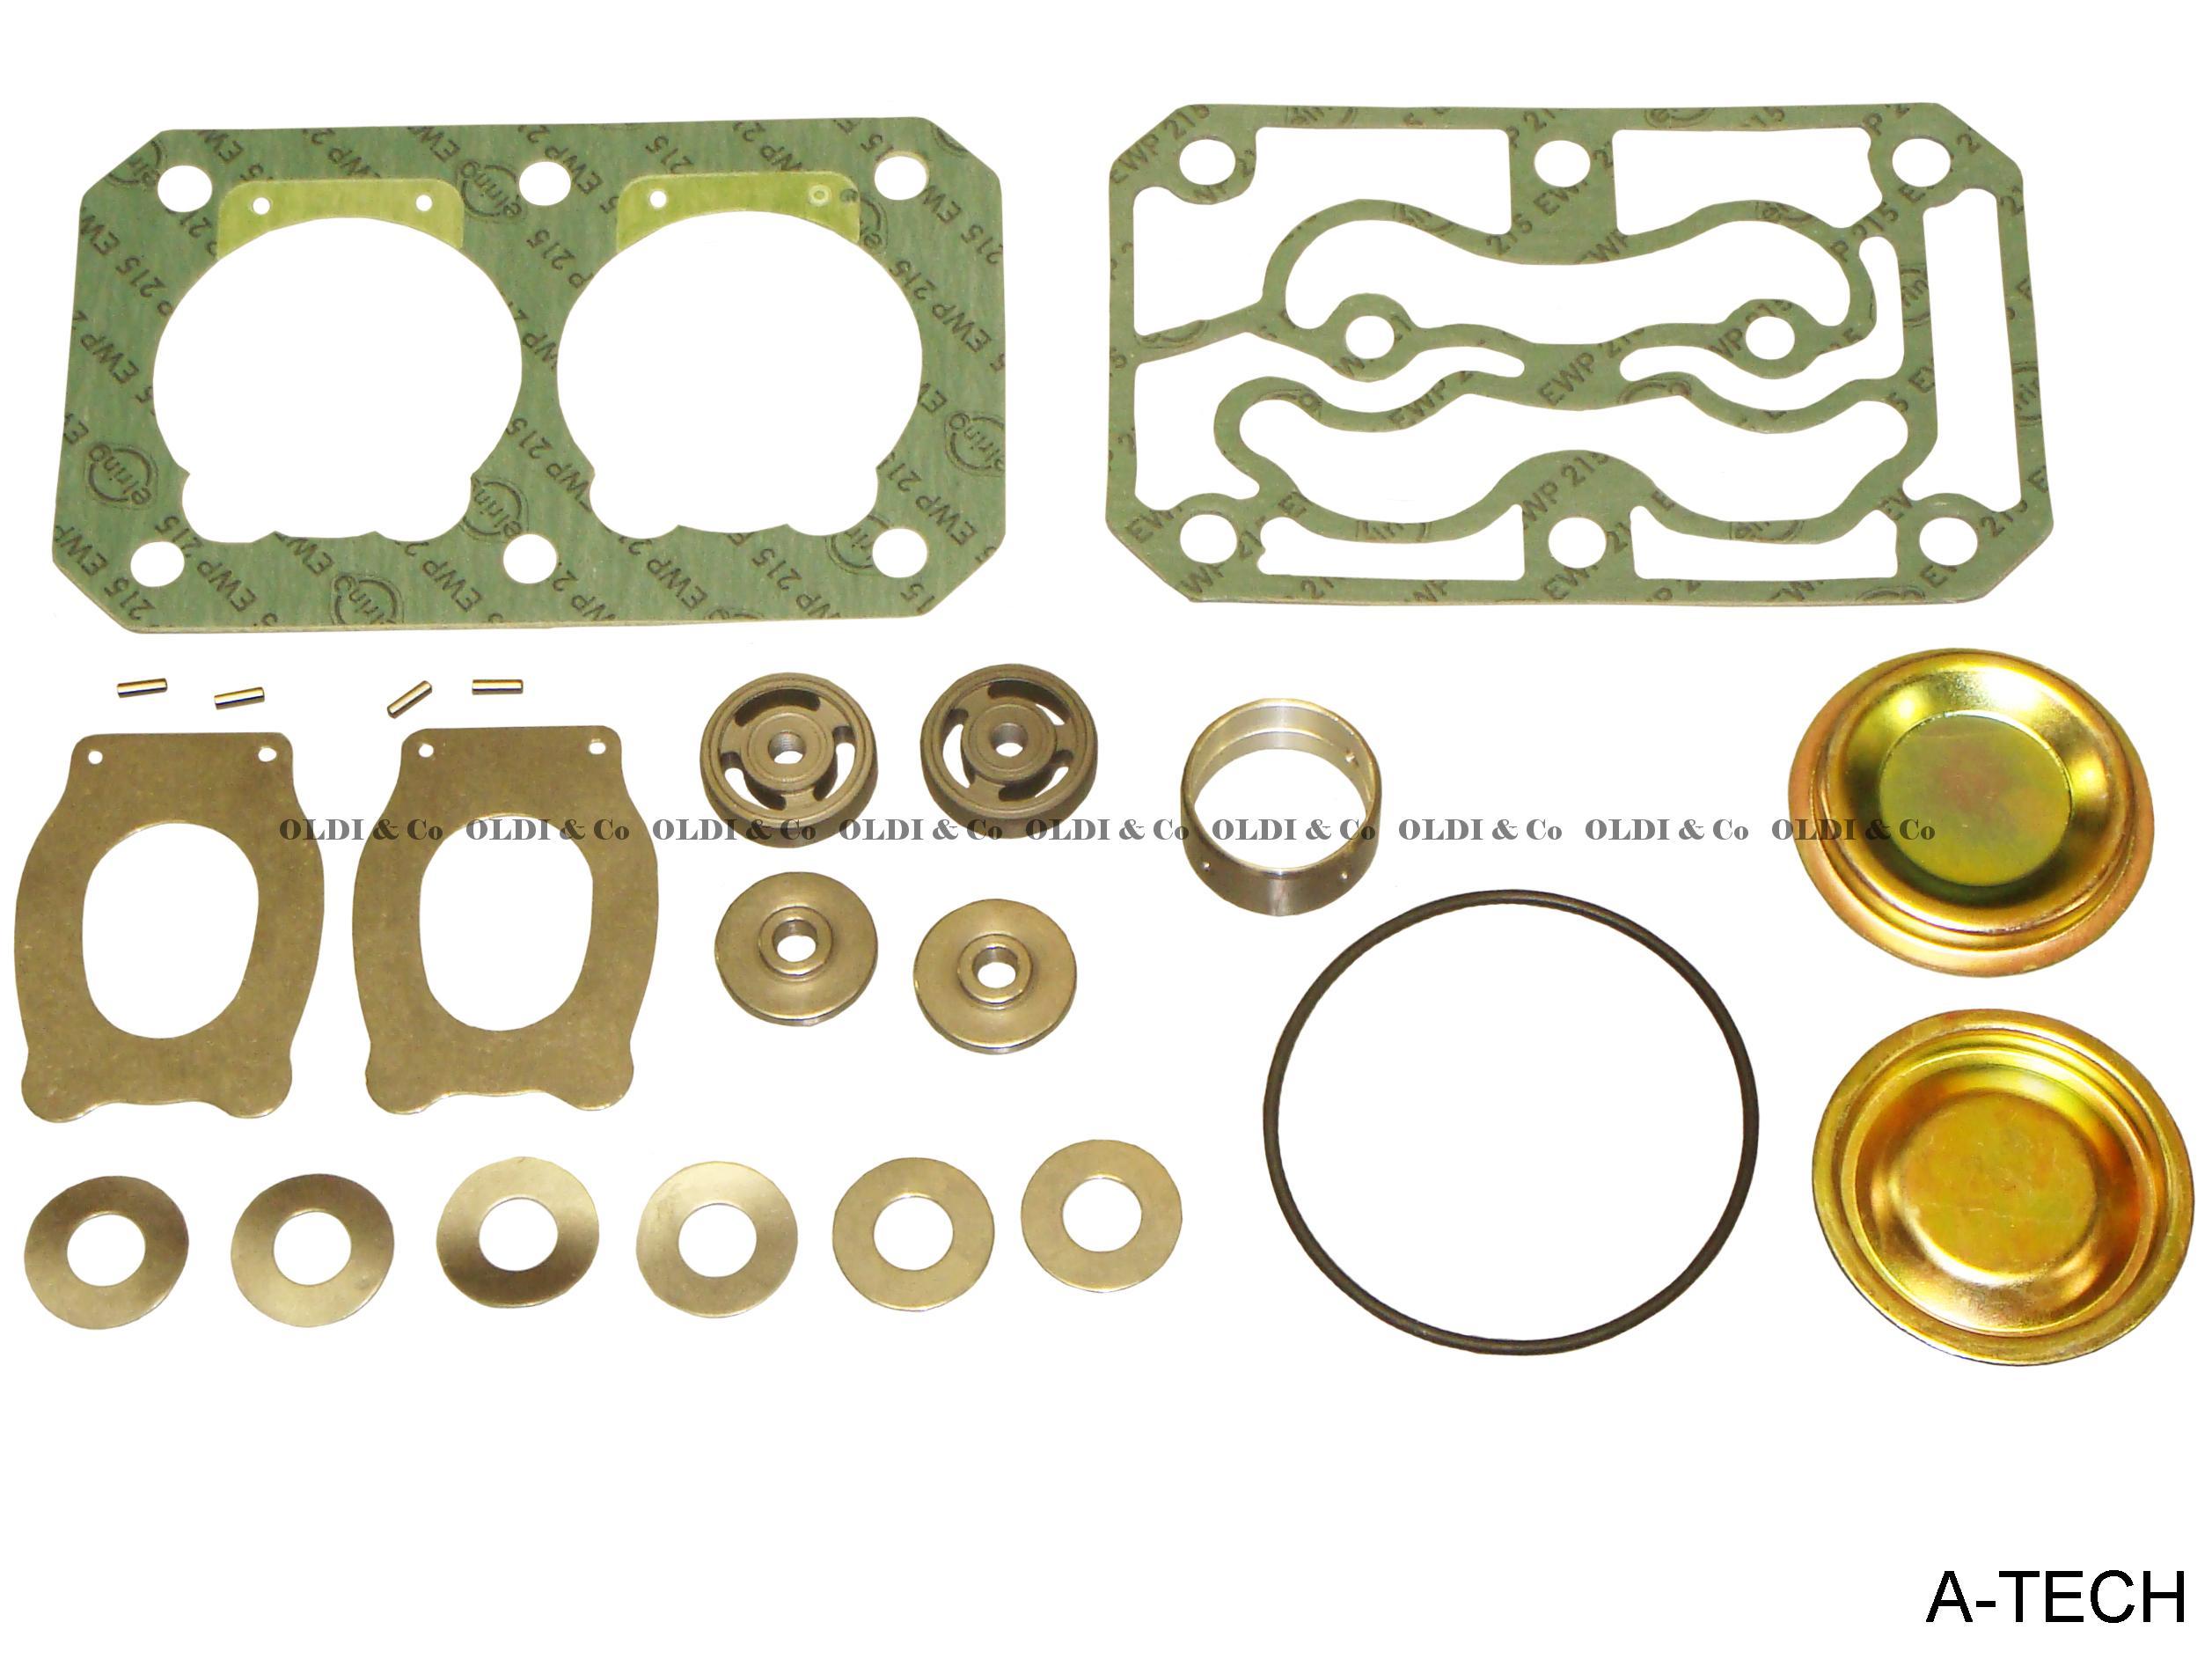 37.016.12152 Compressors and their components → Compressor repair kit